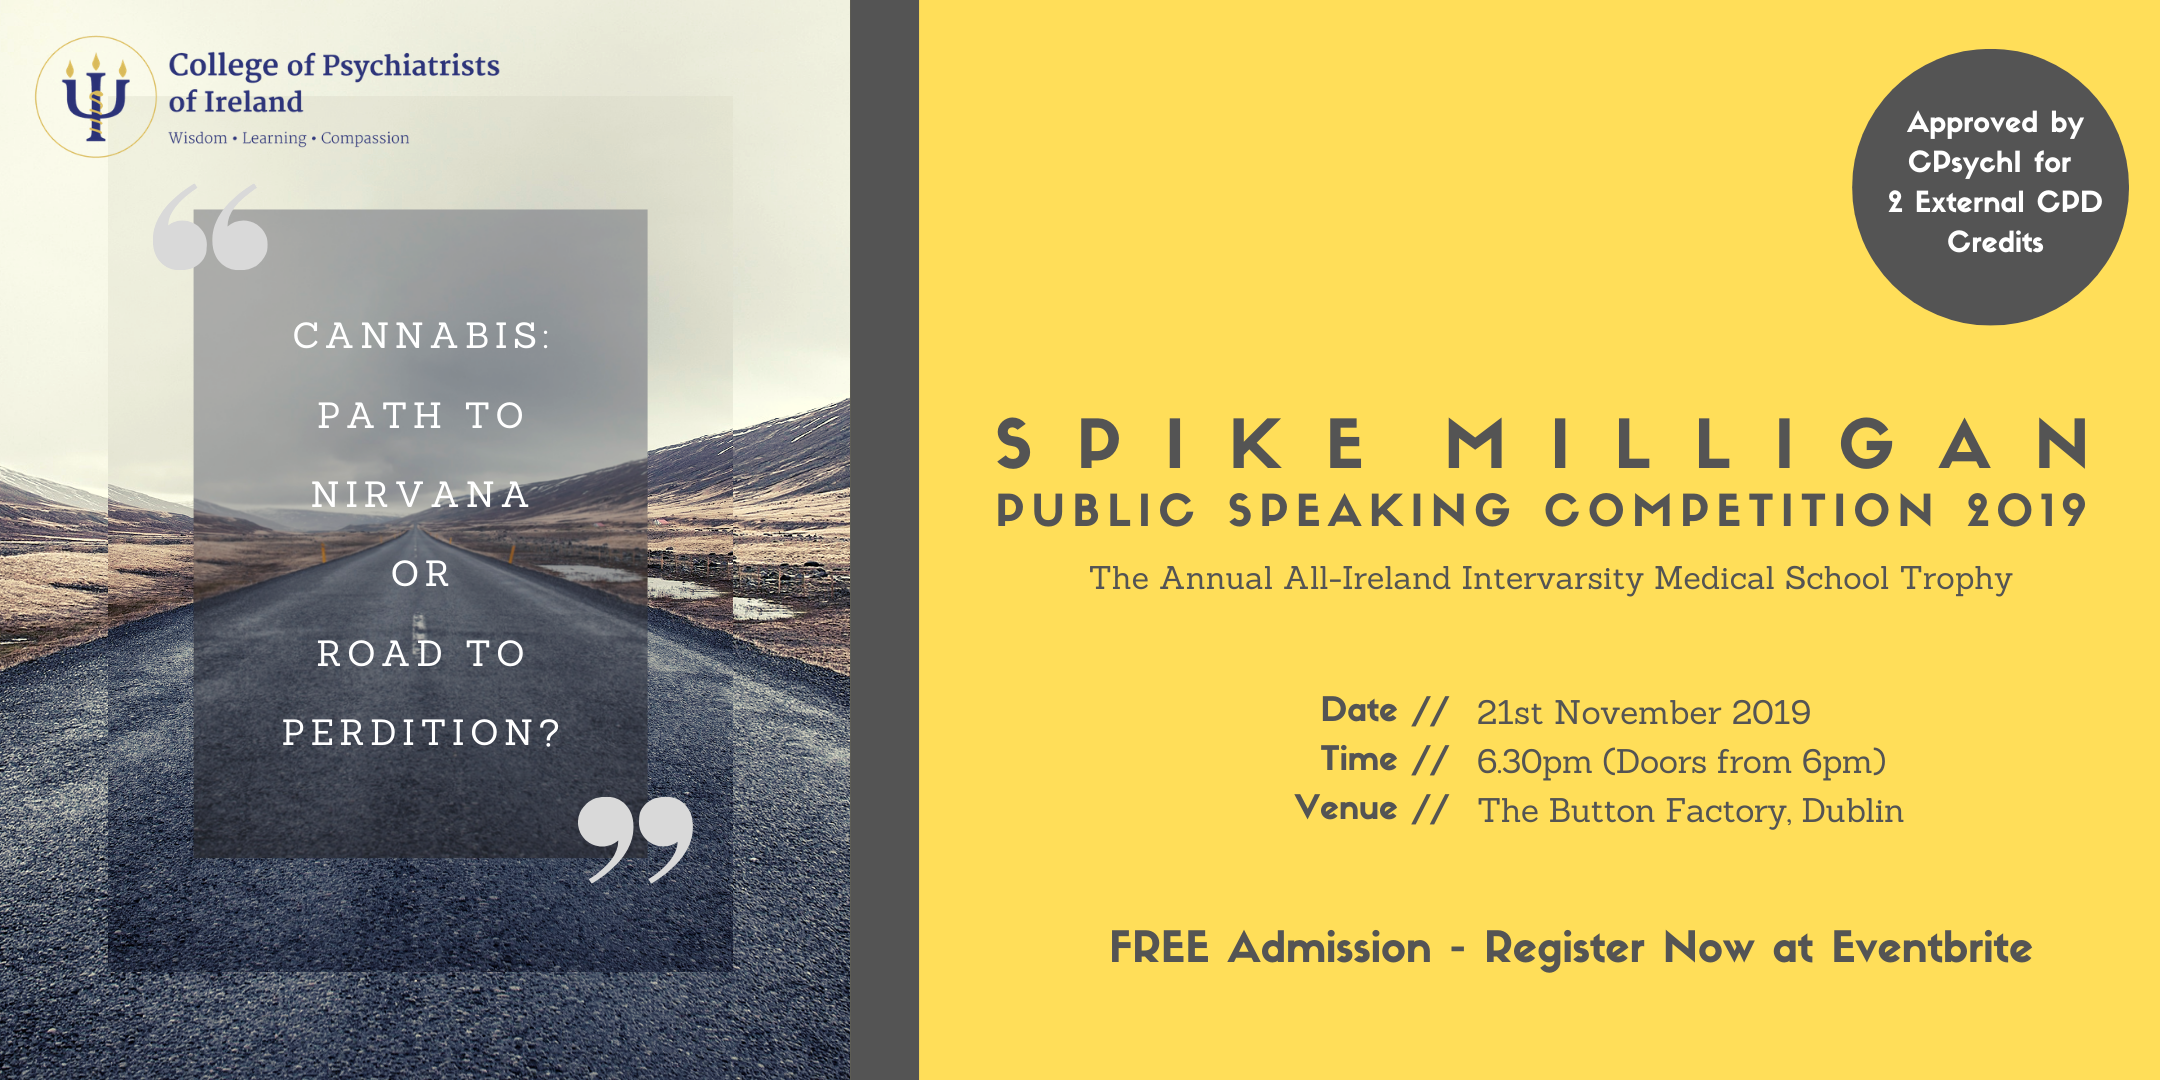 Spike Milligan Public Speaking Competition 2019